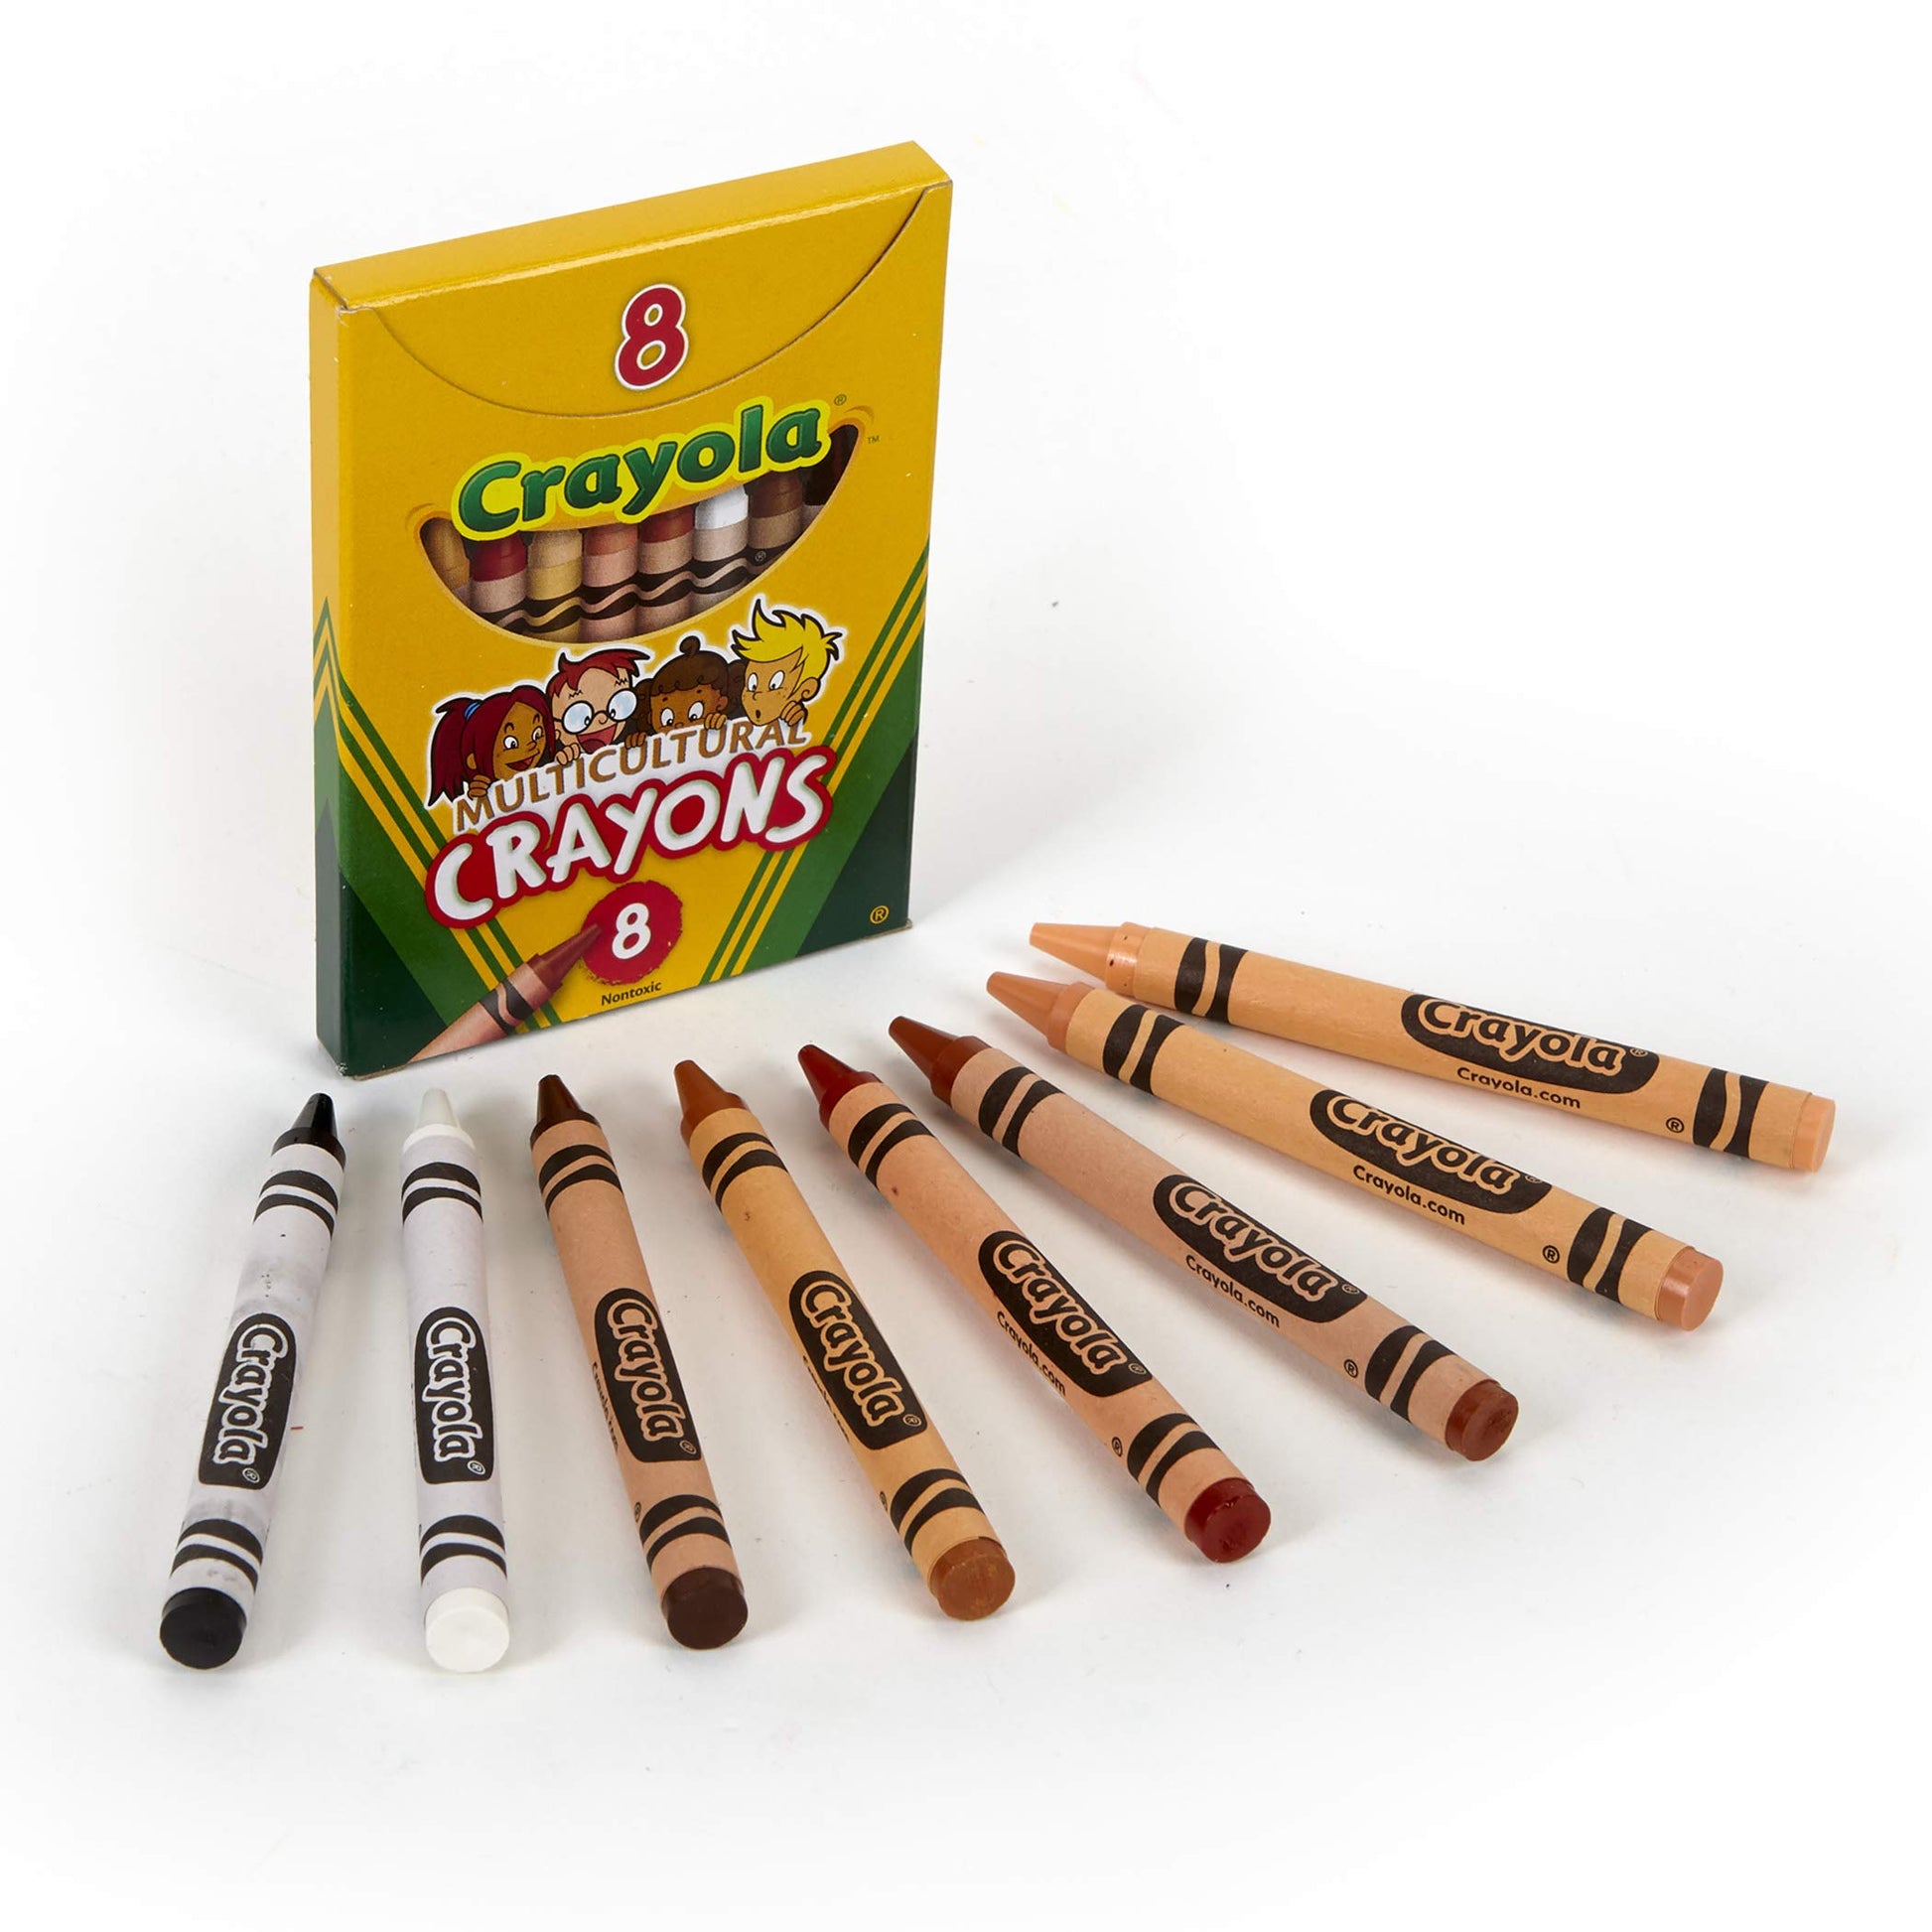 Crayon Rocks Just Rocks in a Box 32 Colors, Draw & Paint